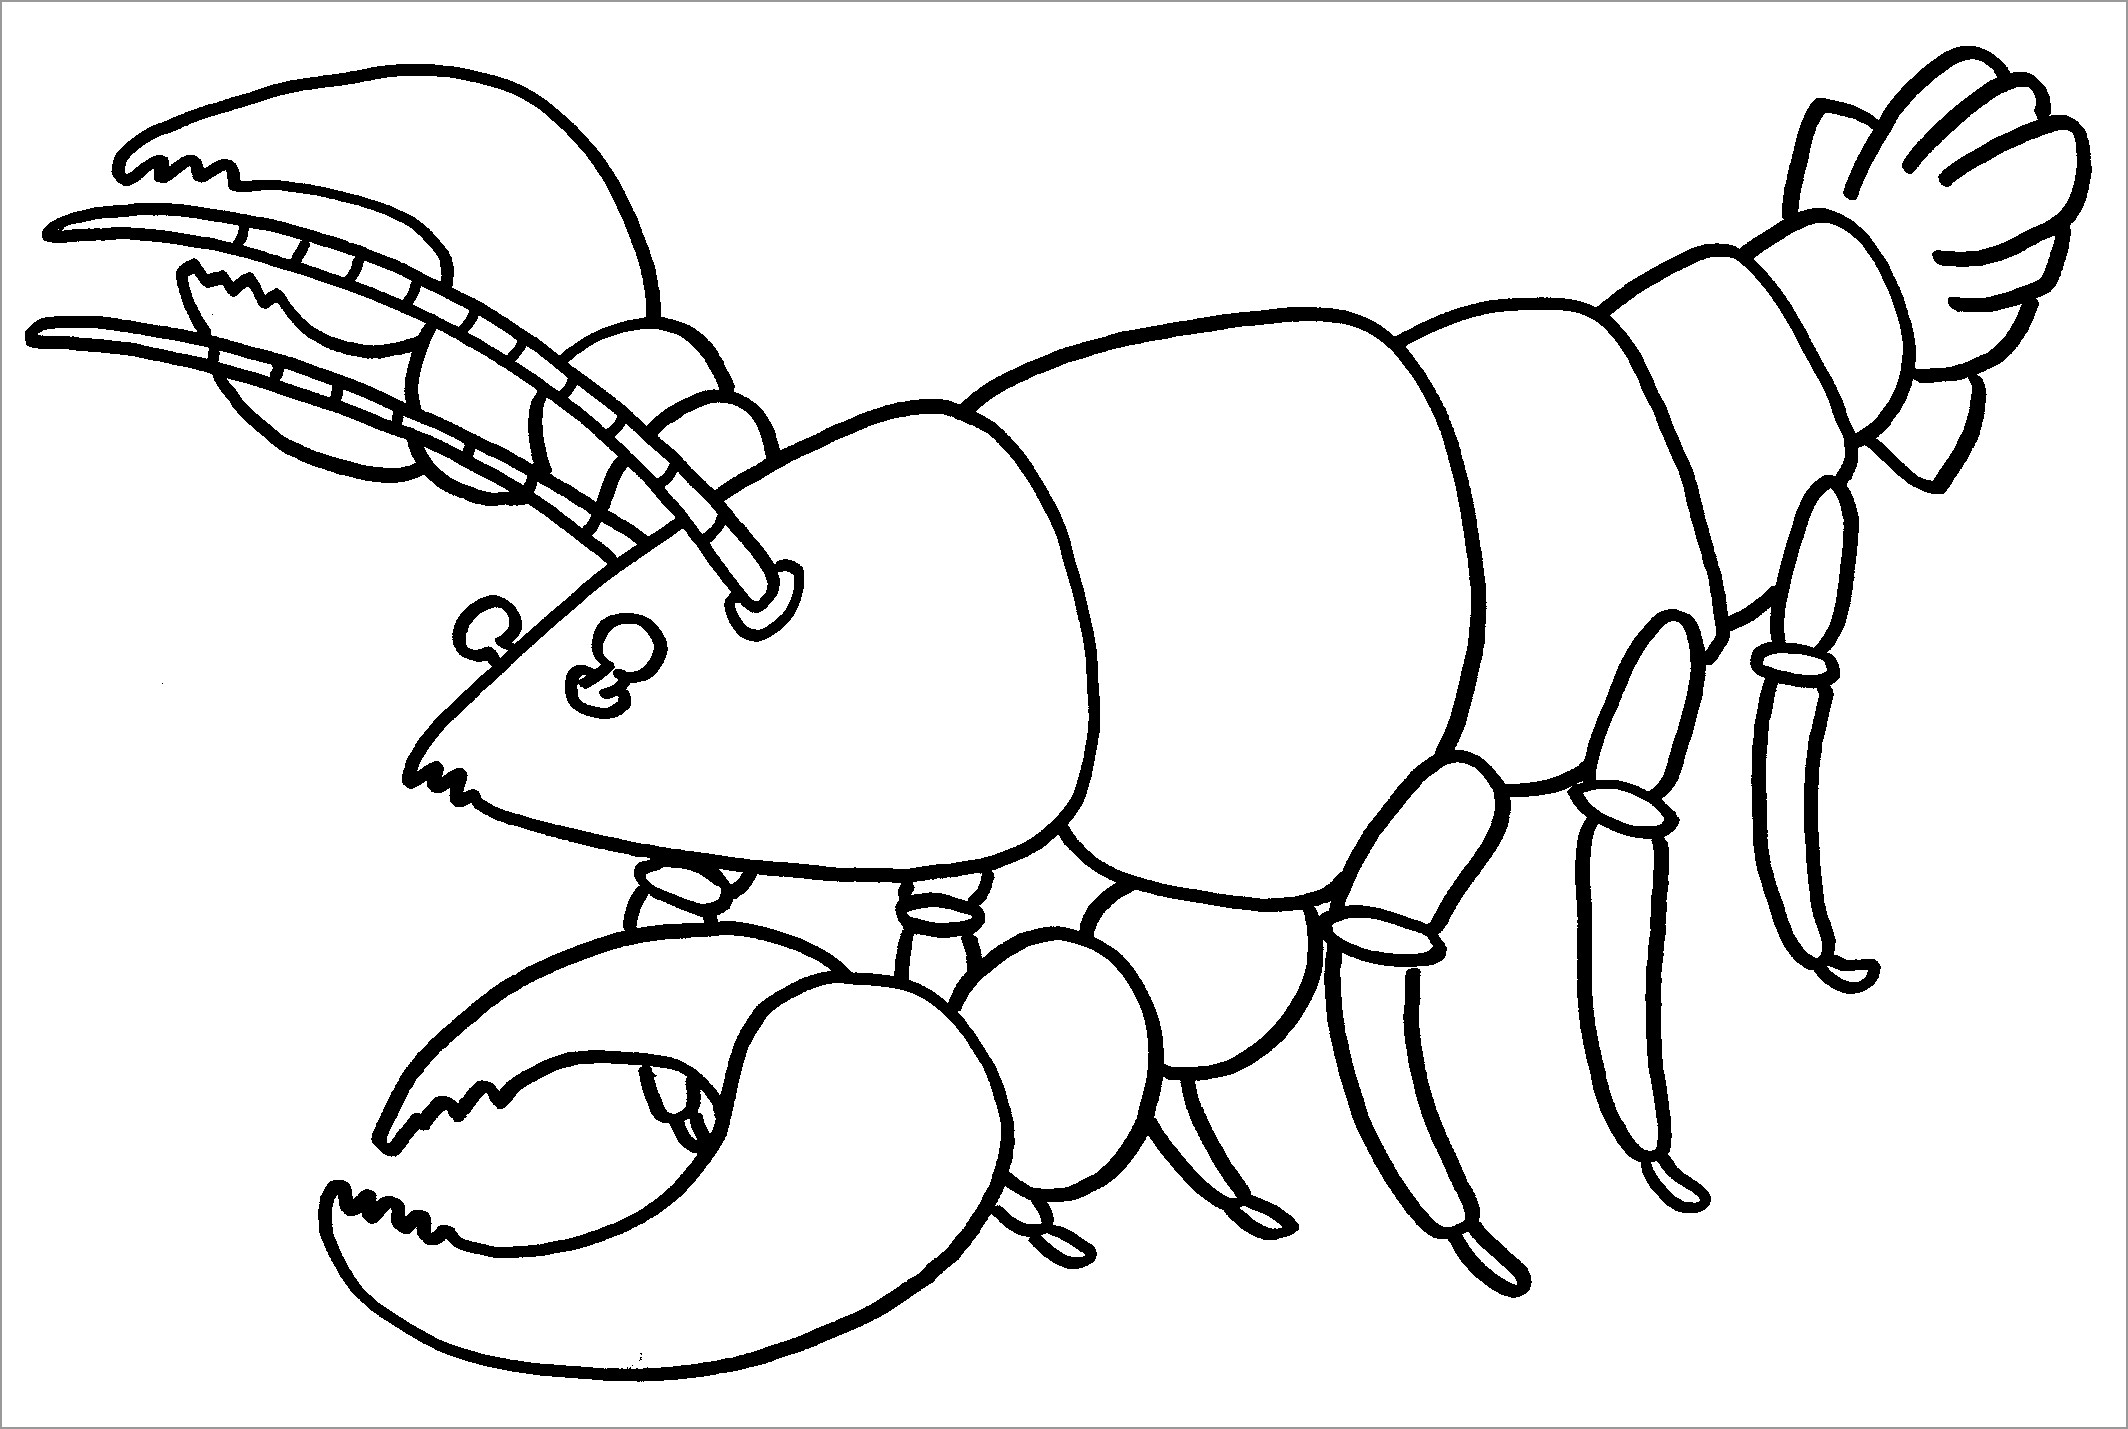 Free Lobster Coloring Page for Kids